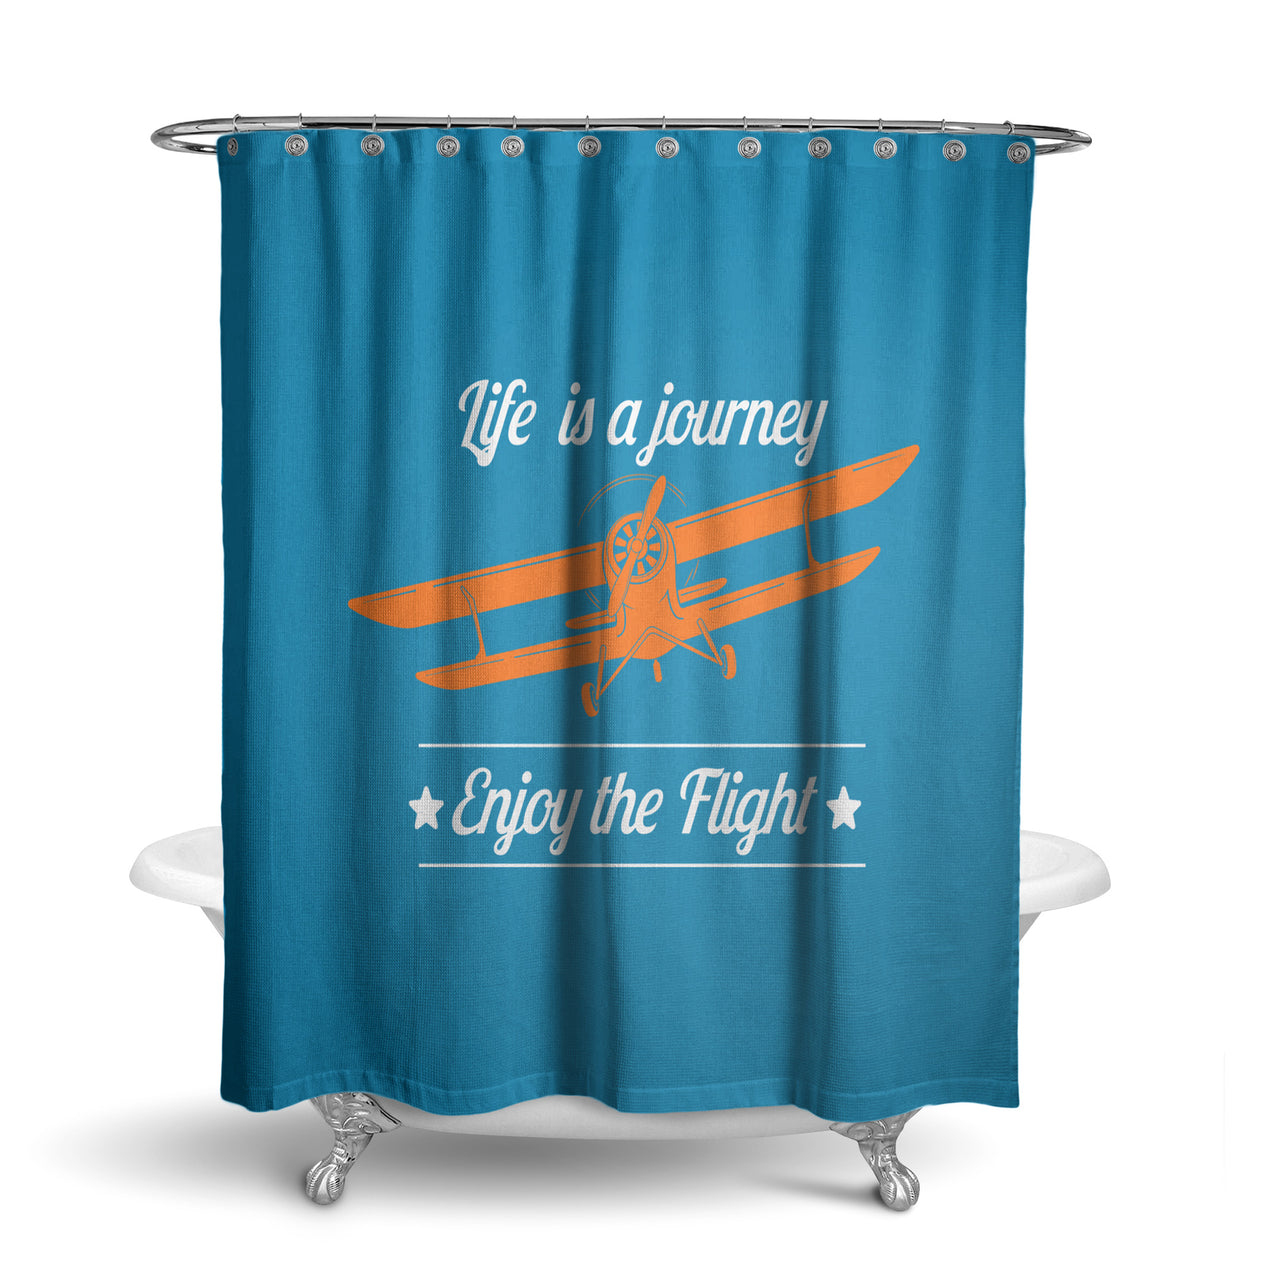 Life is a journey Enjoy the Flight Designed Shower Curtains